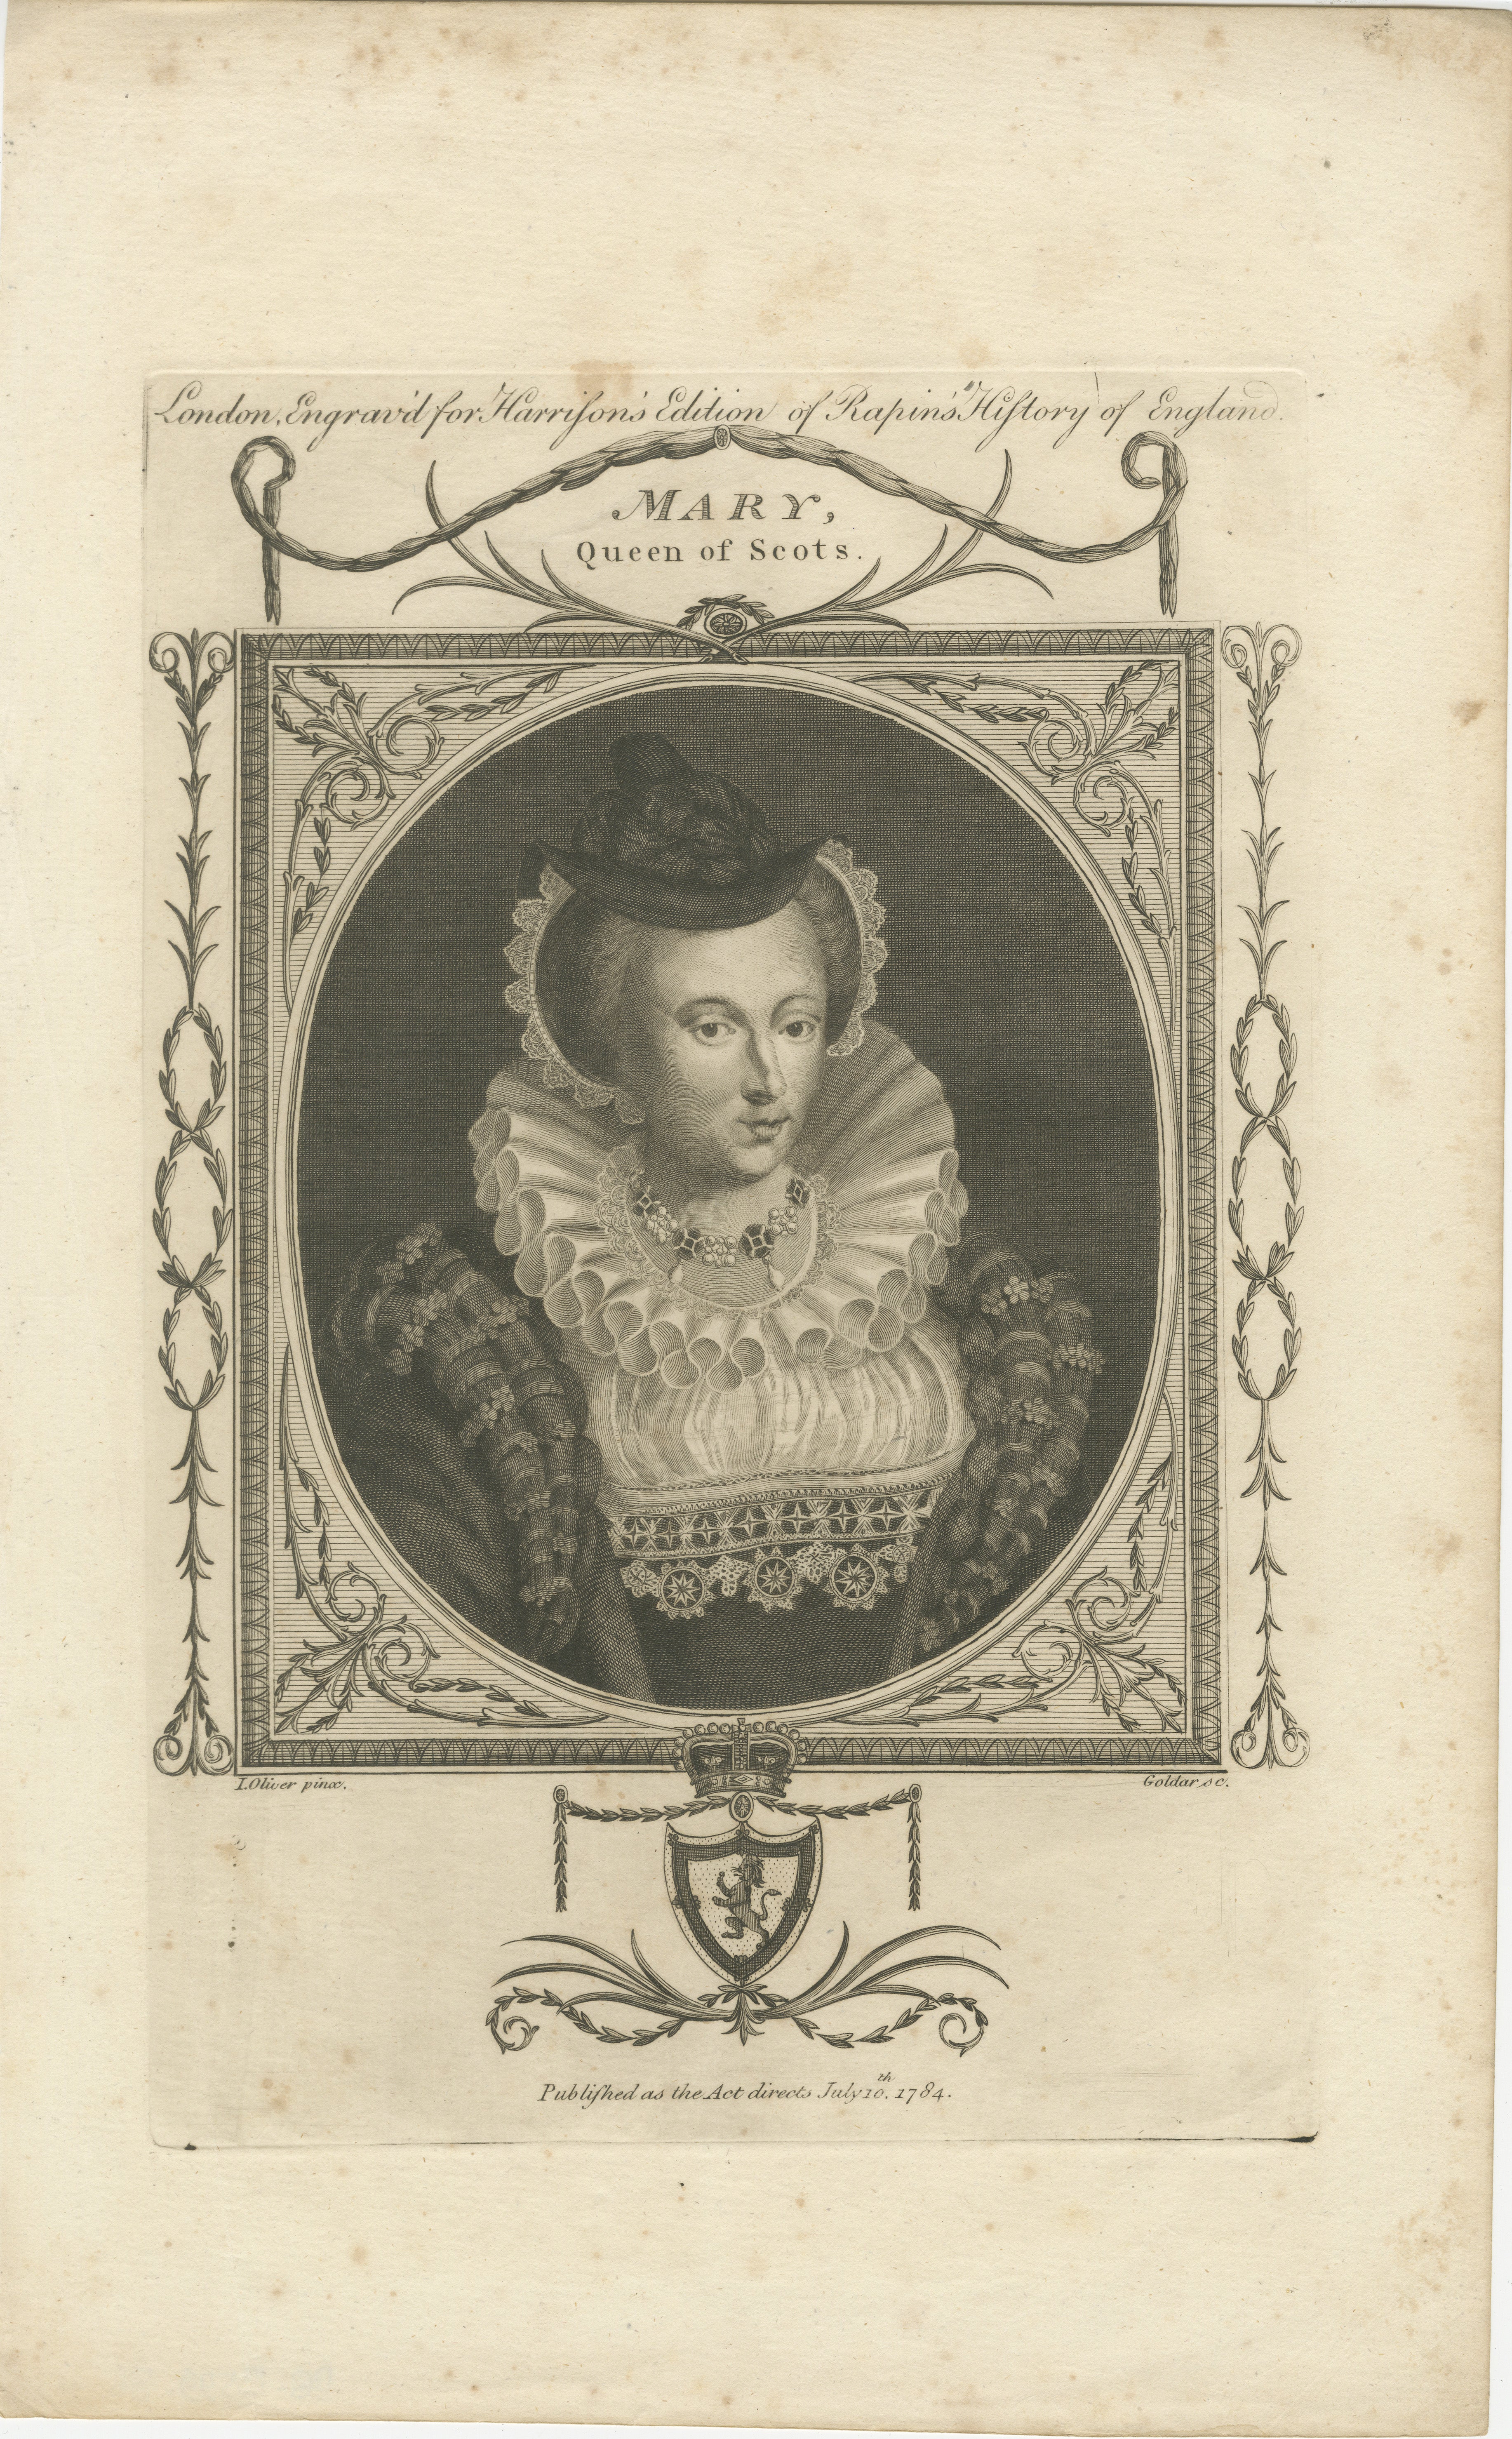 This is an authentic engraved portrait of Mary, Queen of Scots. 

Mary was one of the most fascinating and tragic figures in Scottish and English history. She became queen consort in France through her marriage to Francis II, and after being